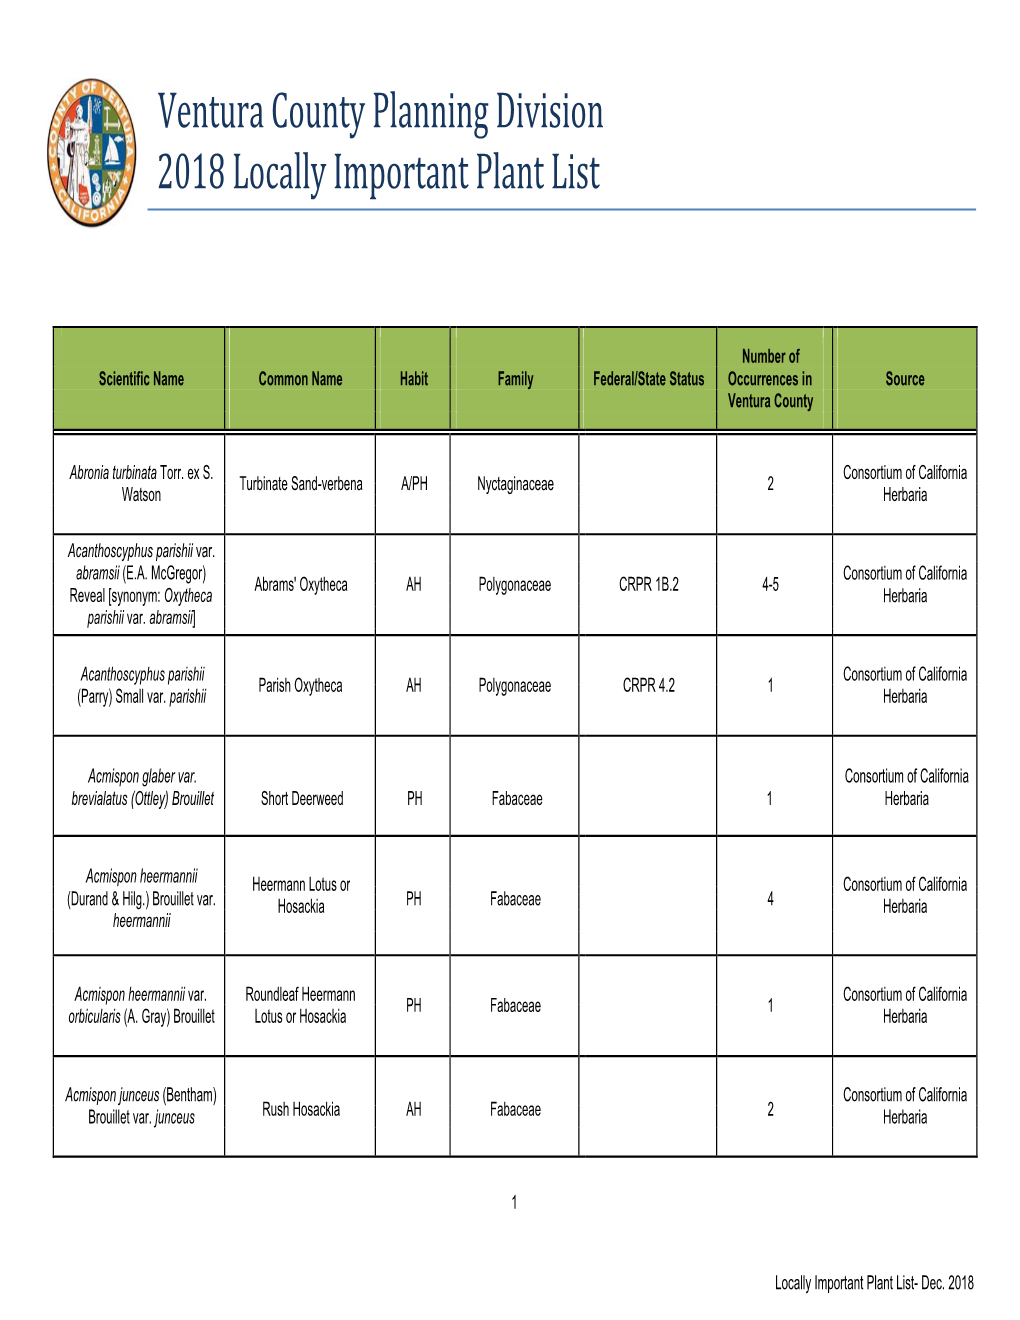 Ventura County Planning Division 2018 Locally Important Plant List